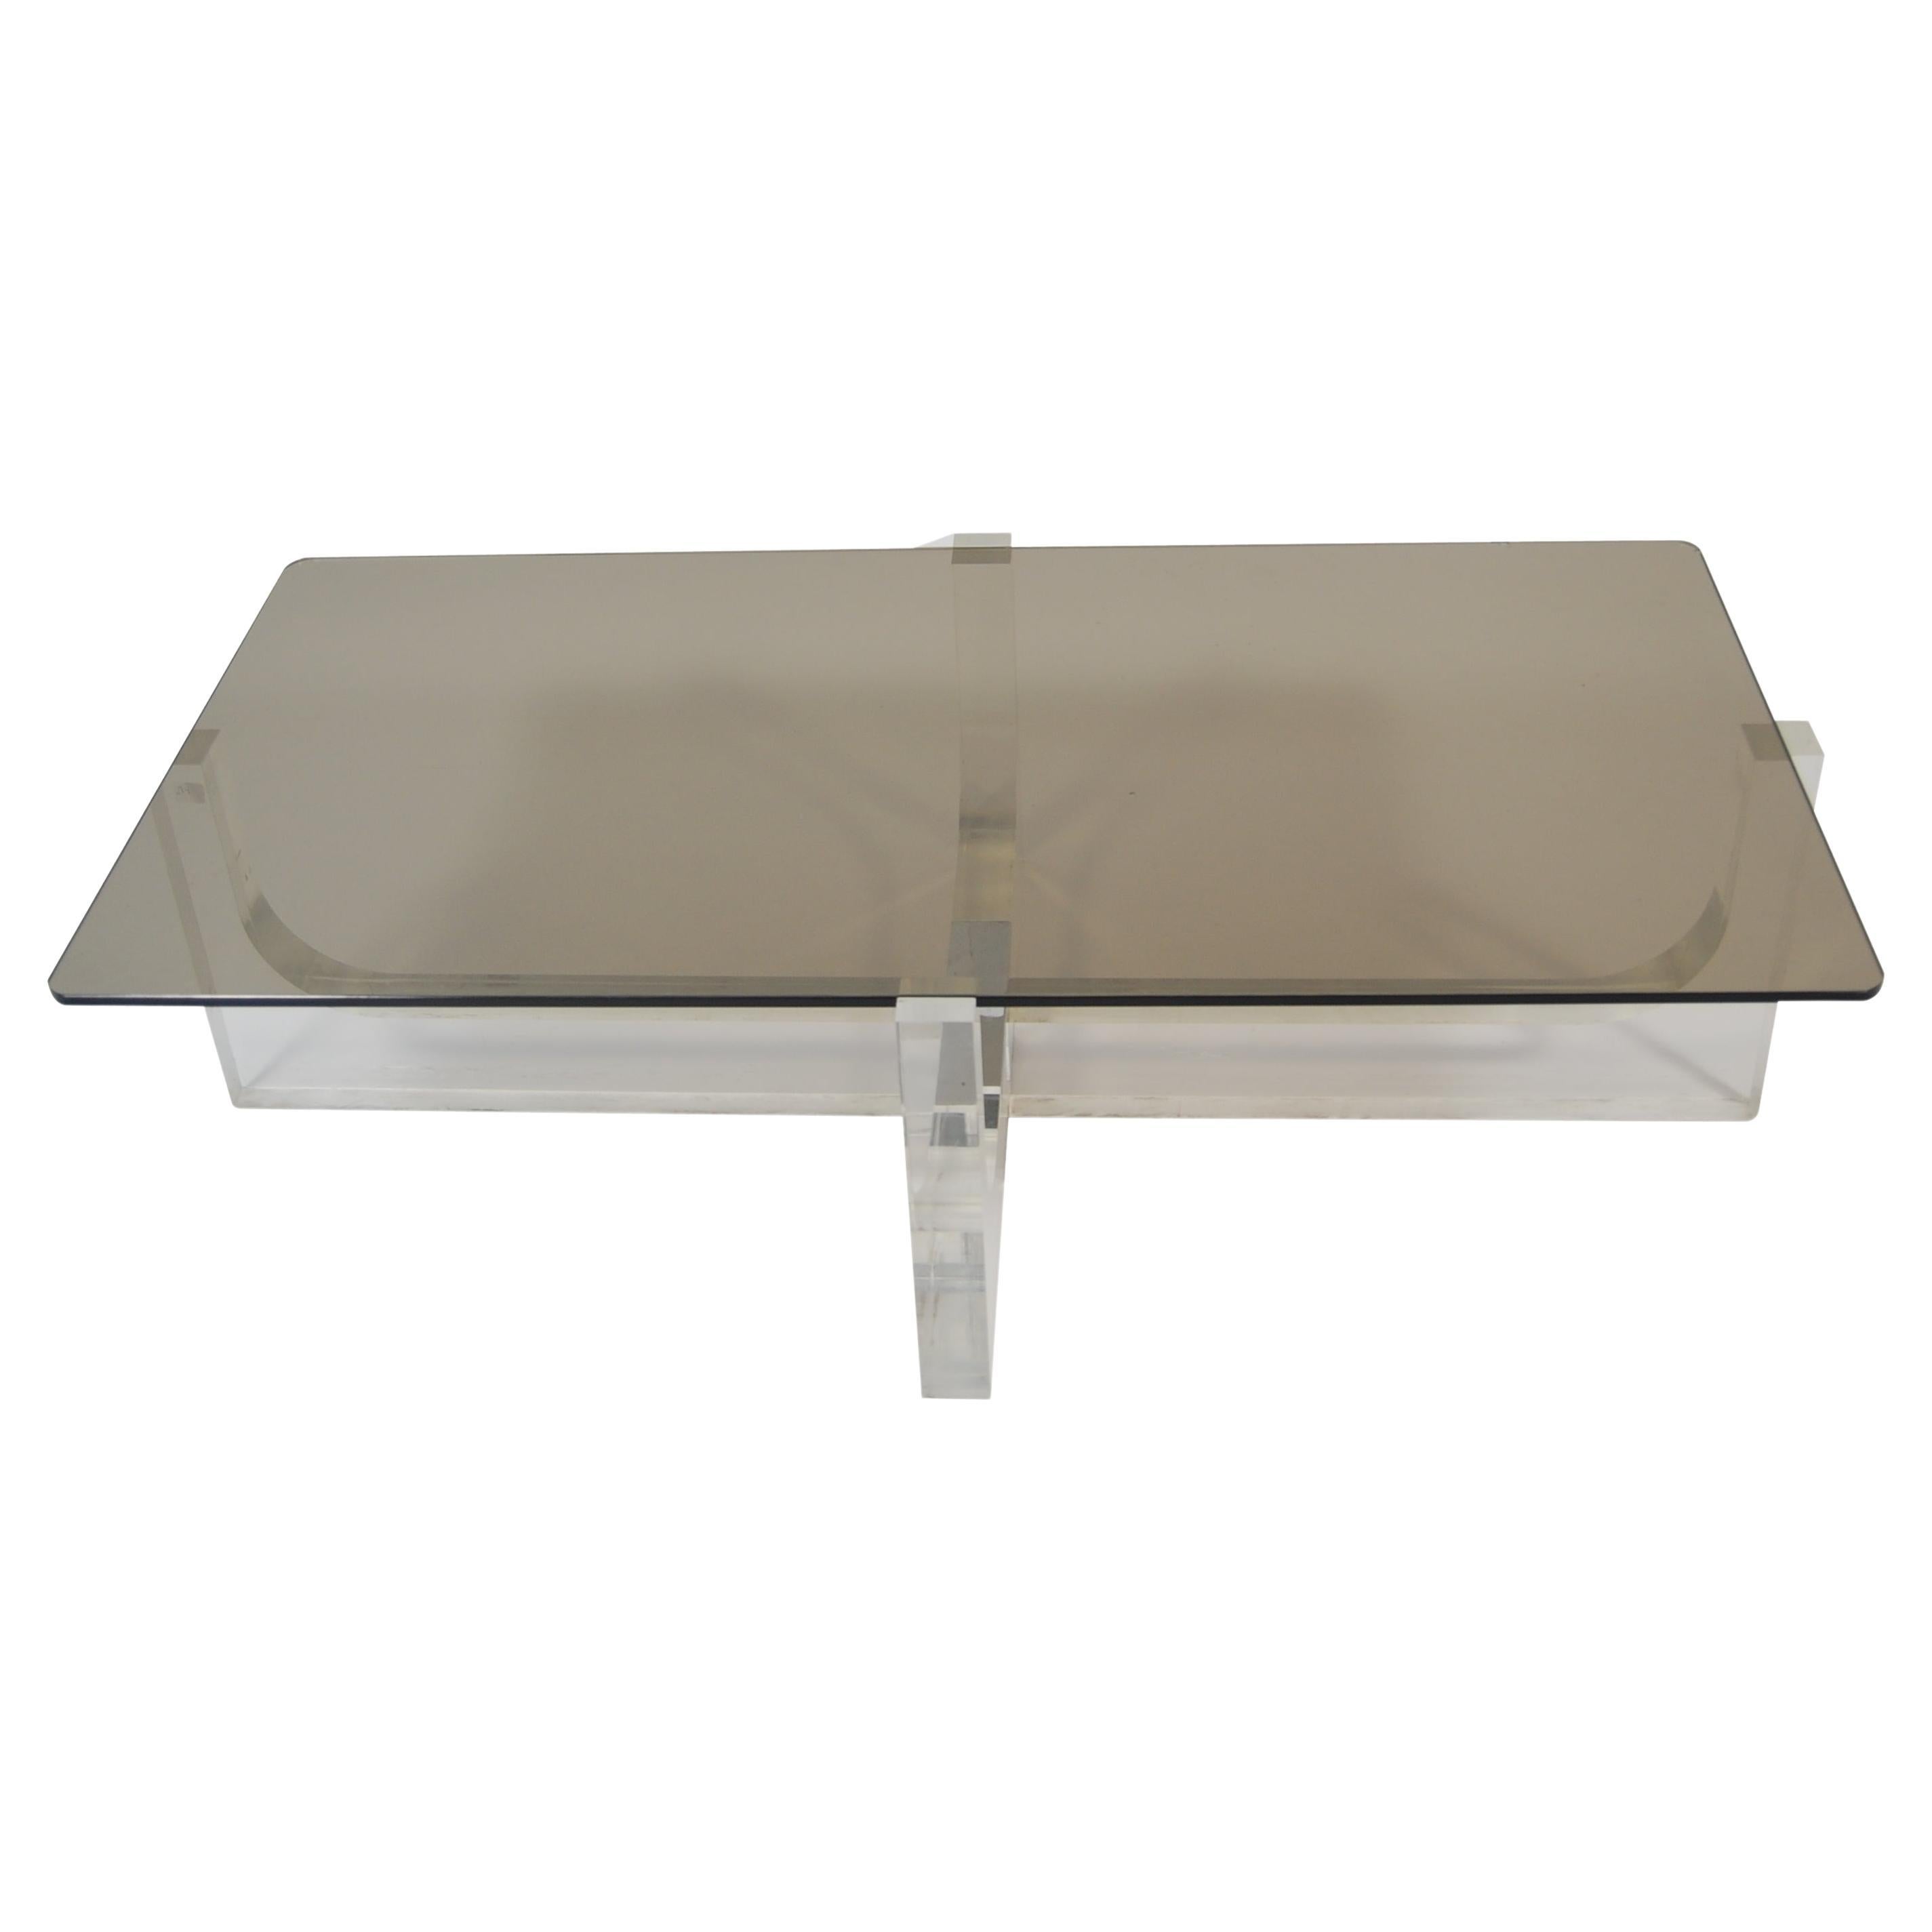 Lucite and Glass Coffee Table